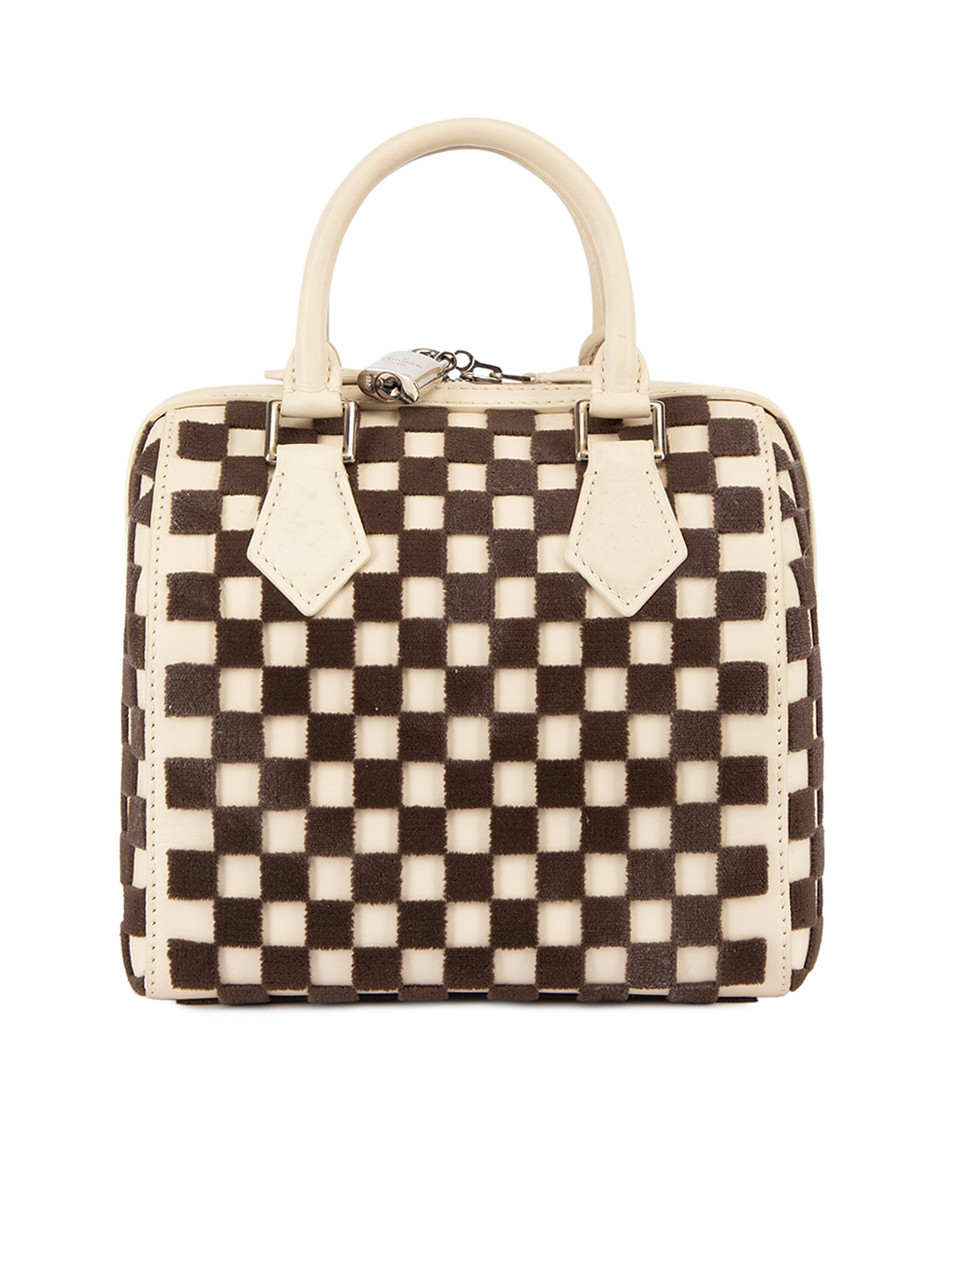 Louis Vuitton Limited Edition Brown Damier Cubic Speedy Cube PM